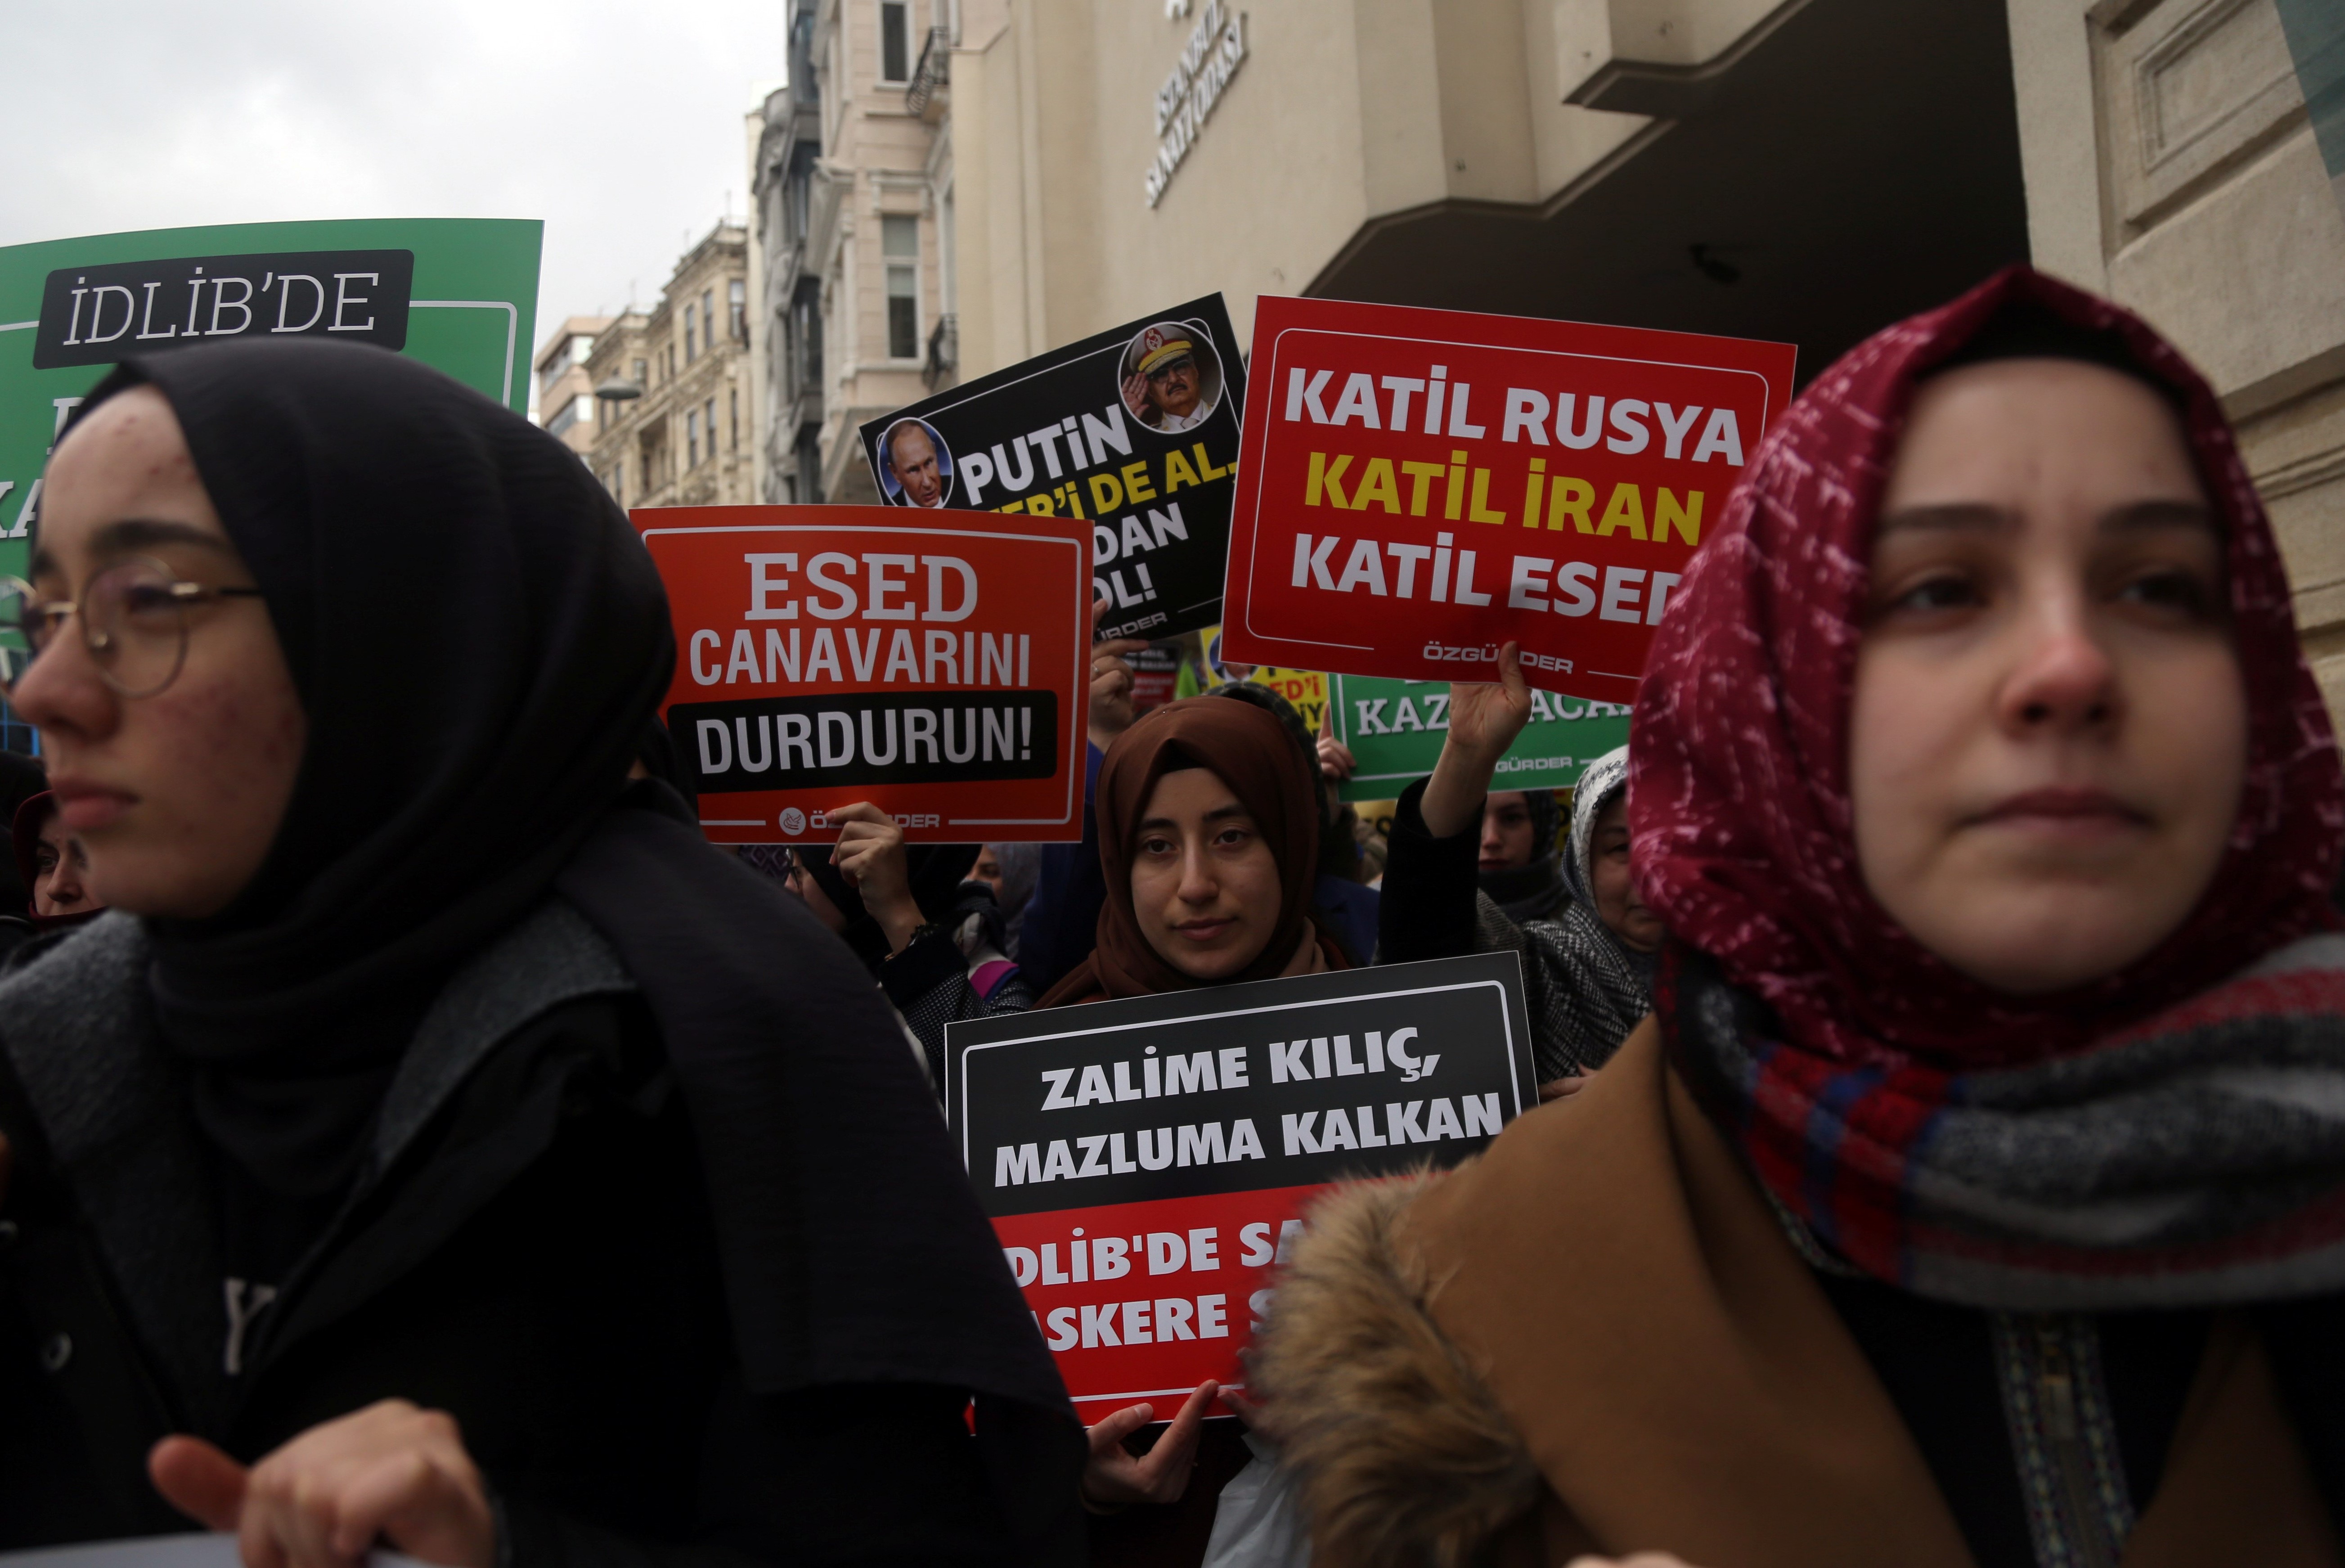 Demonstrators hold placards during a protest against killing of Turkish soldiers in Syria's Idlib region, near the Russian Consulate in Istanbul, Turkey, February 29, 2020